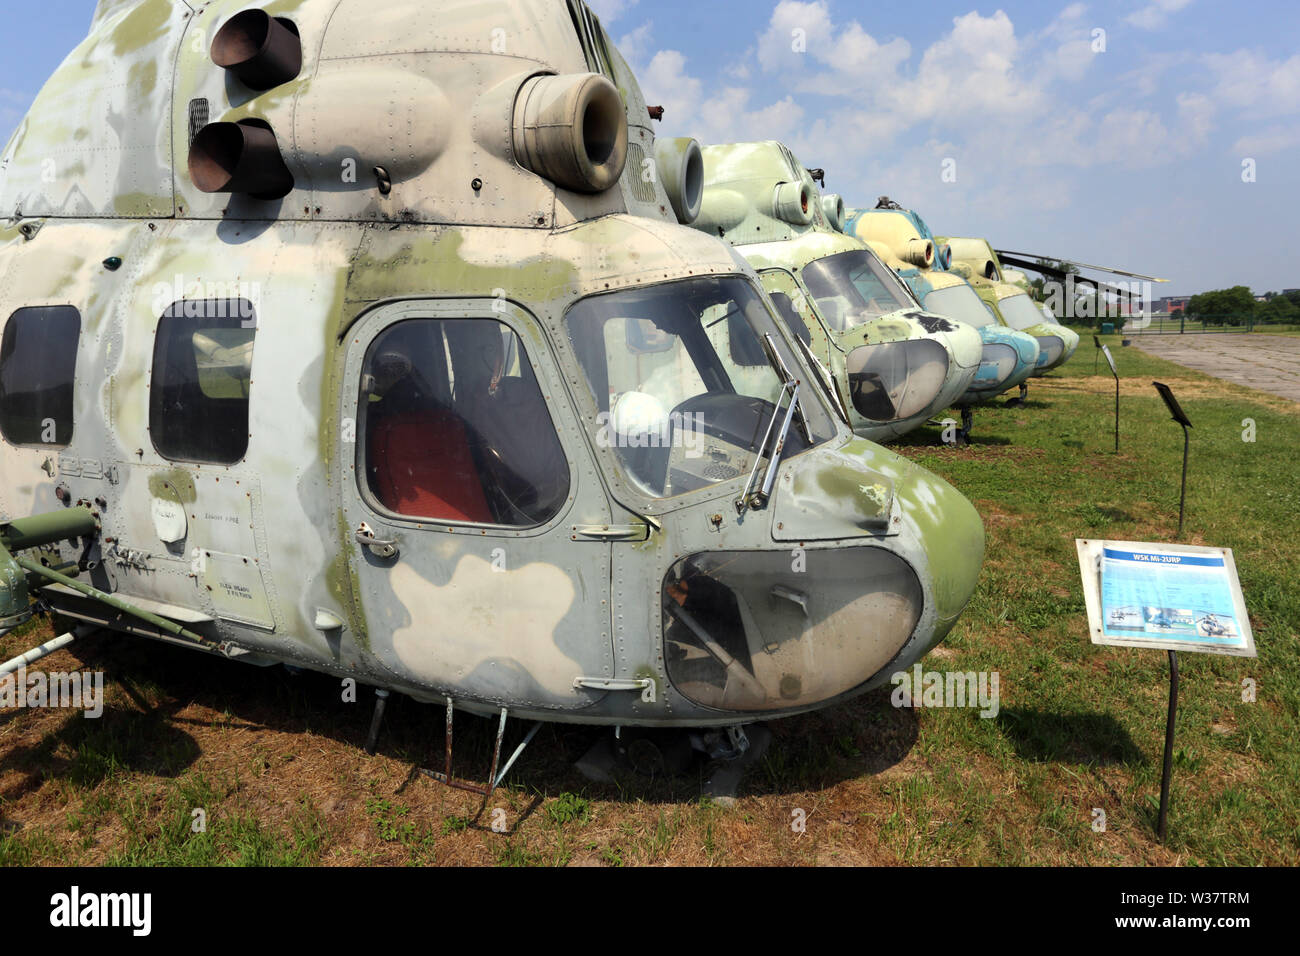 Cracow. Krakow. Poland. Museum of Polish Aviation. The collection of Mi-2 helicopters. Stock Photo